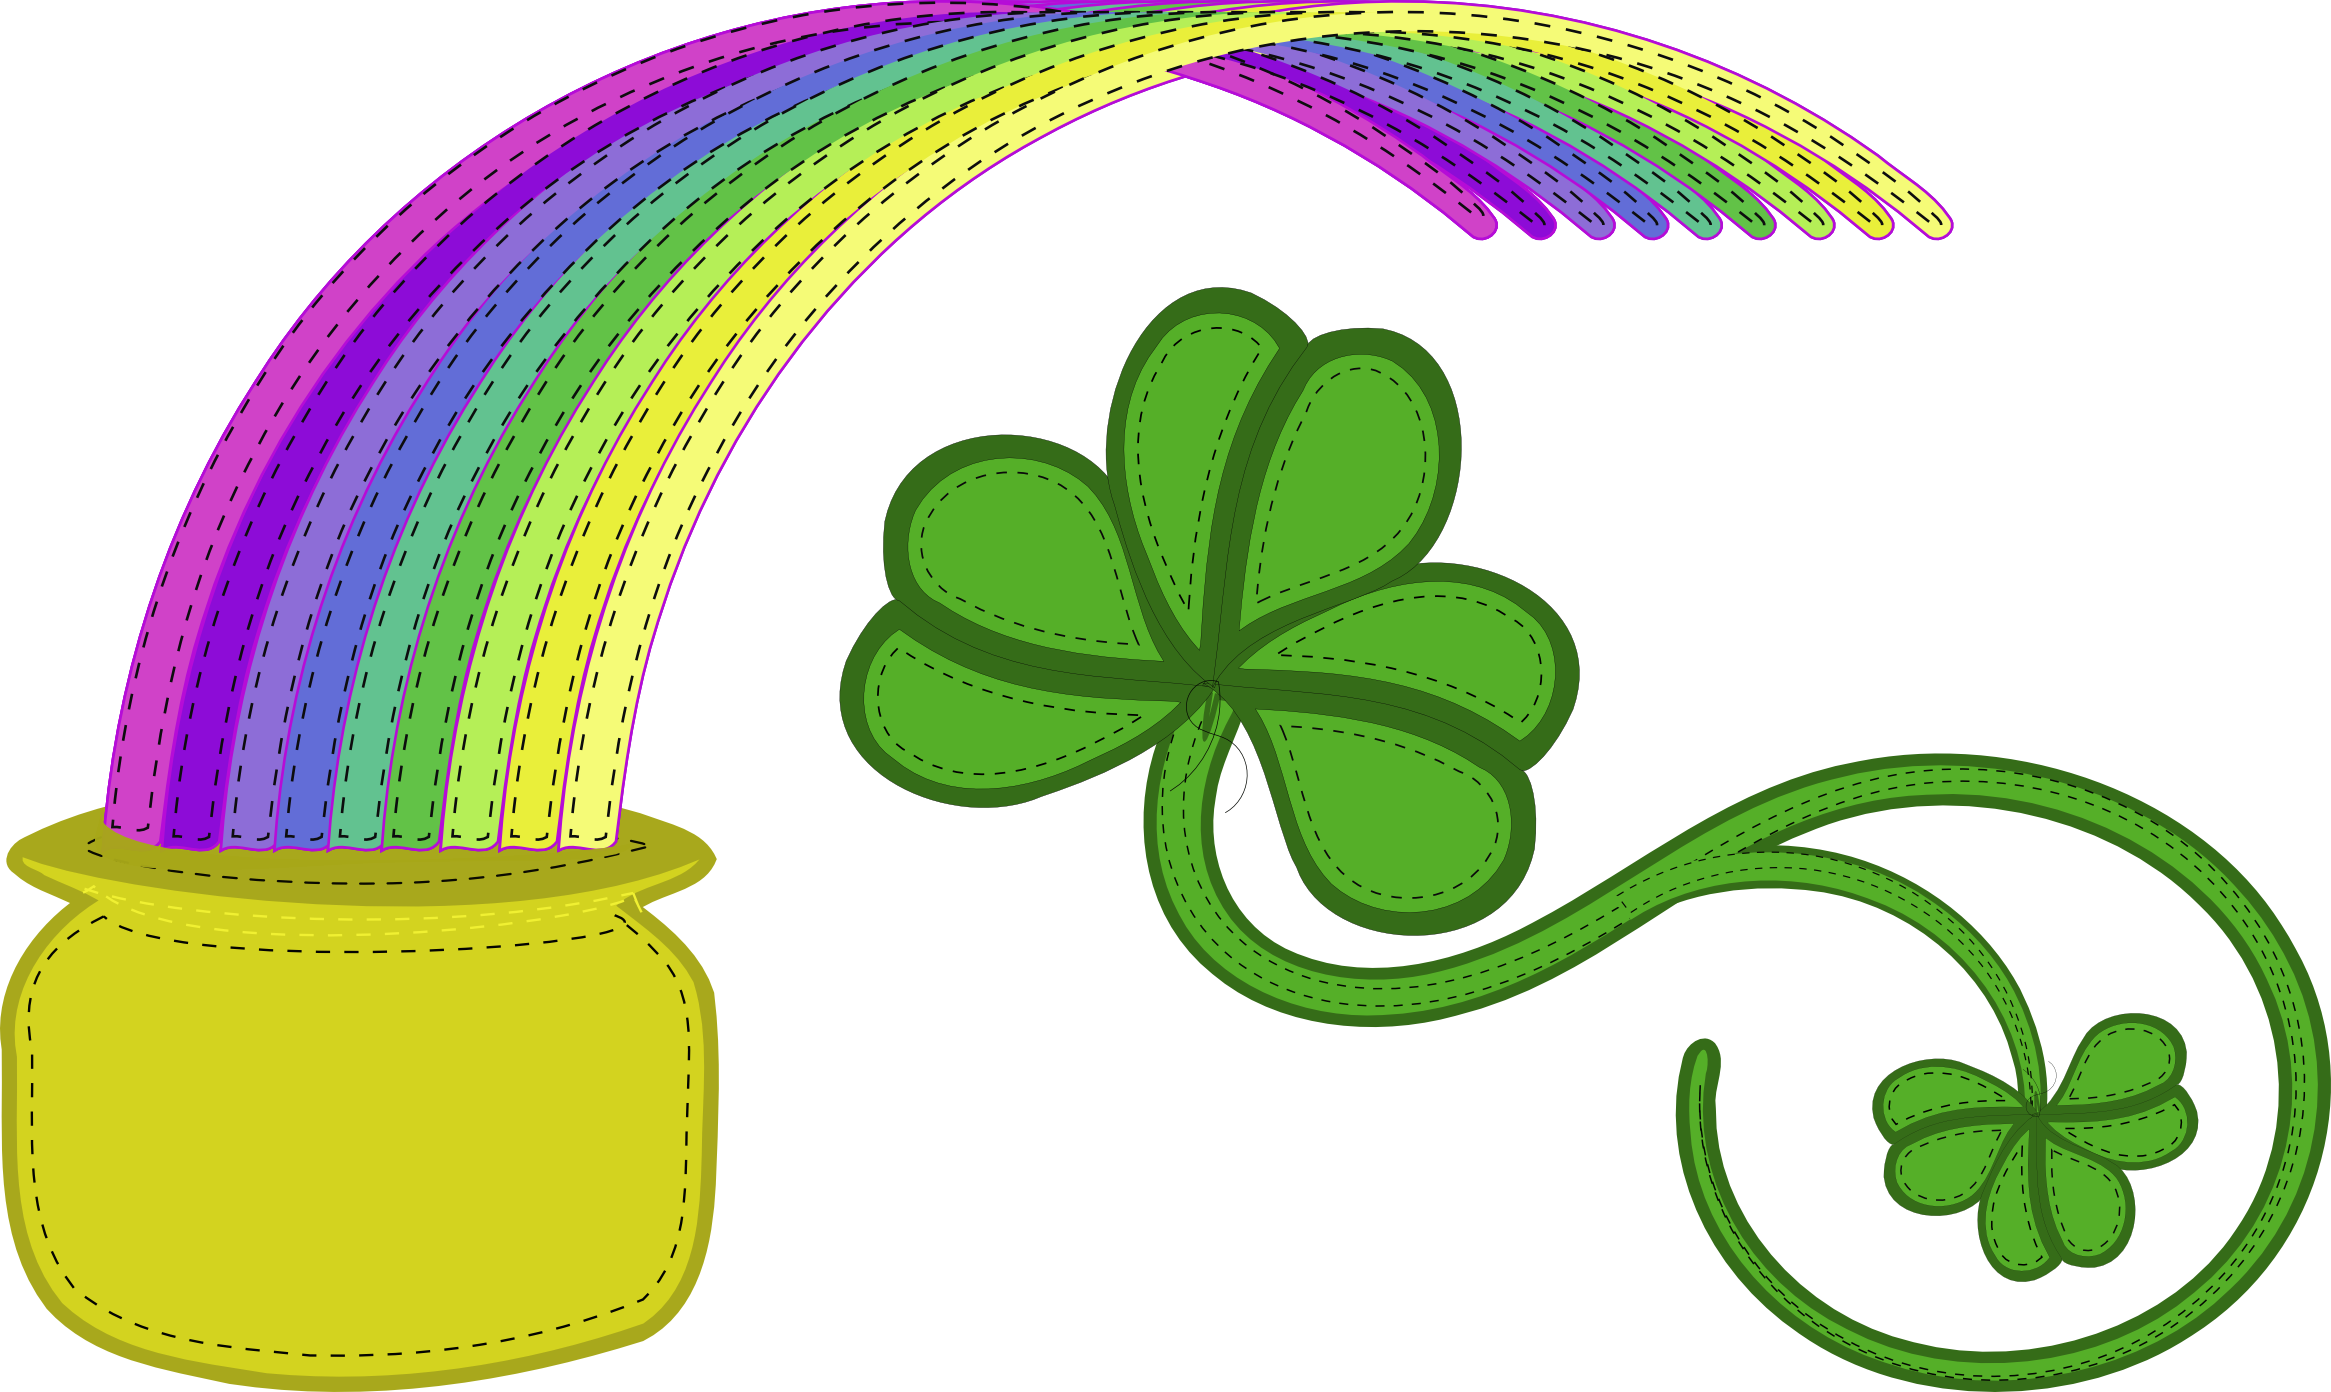     Pot Of Gold Clipart Black And White   Clipart Panda   Free Clipart